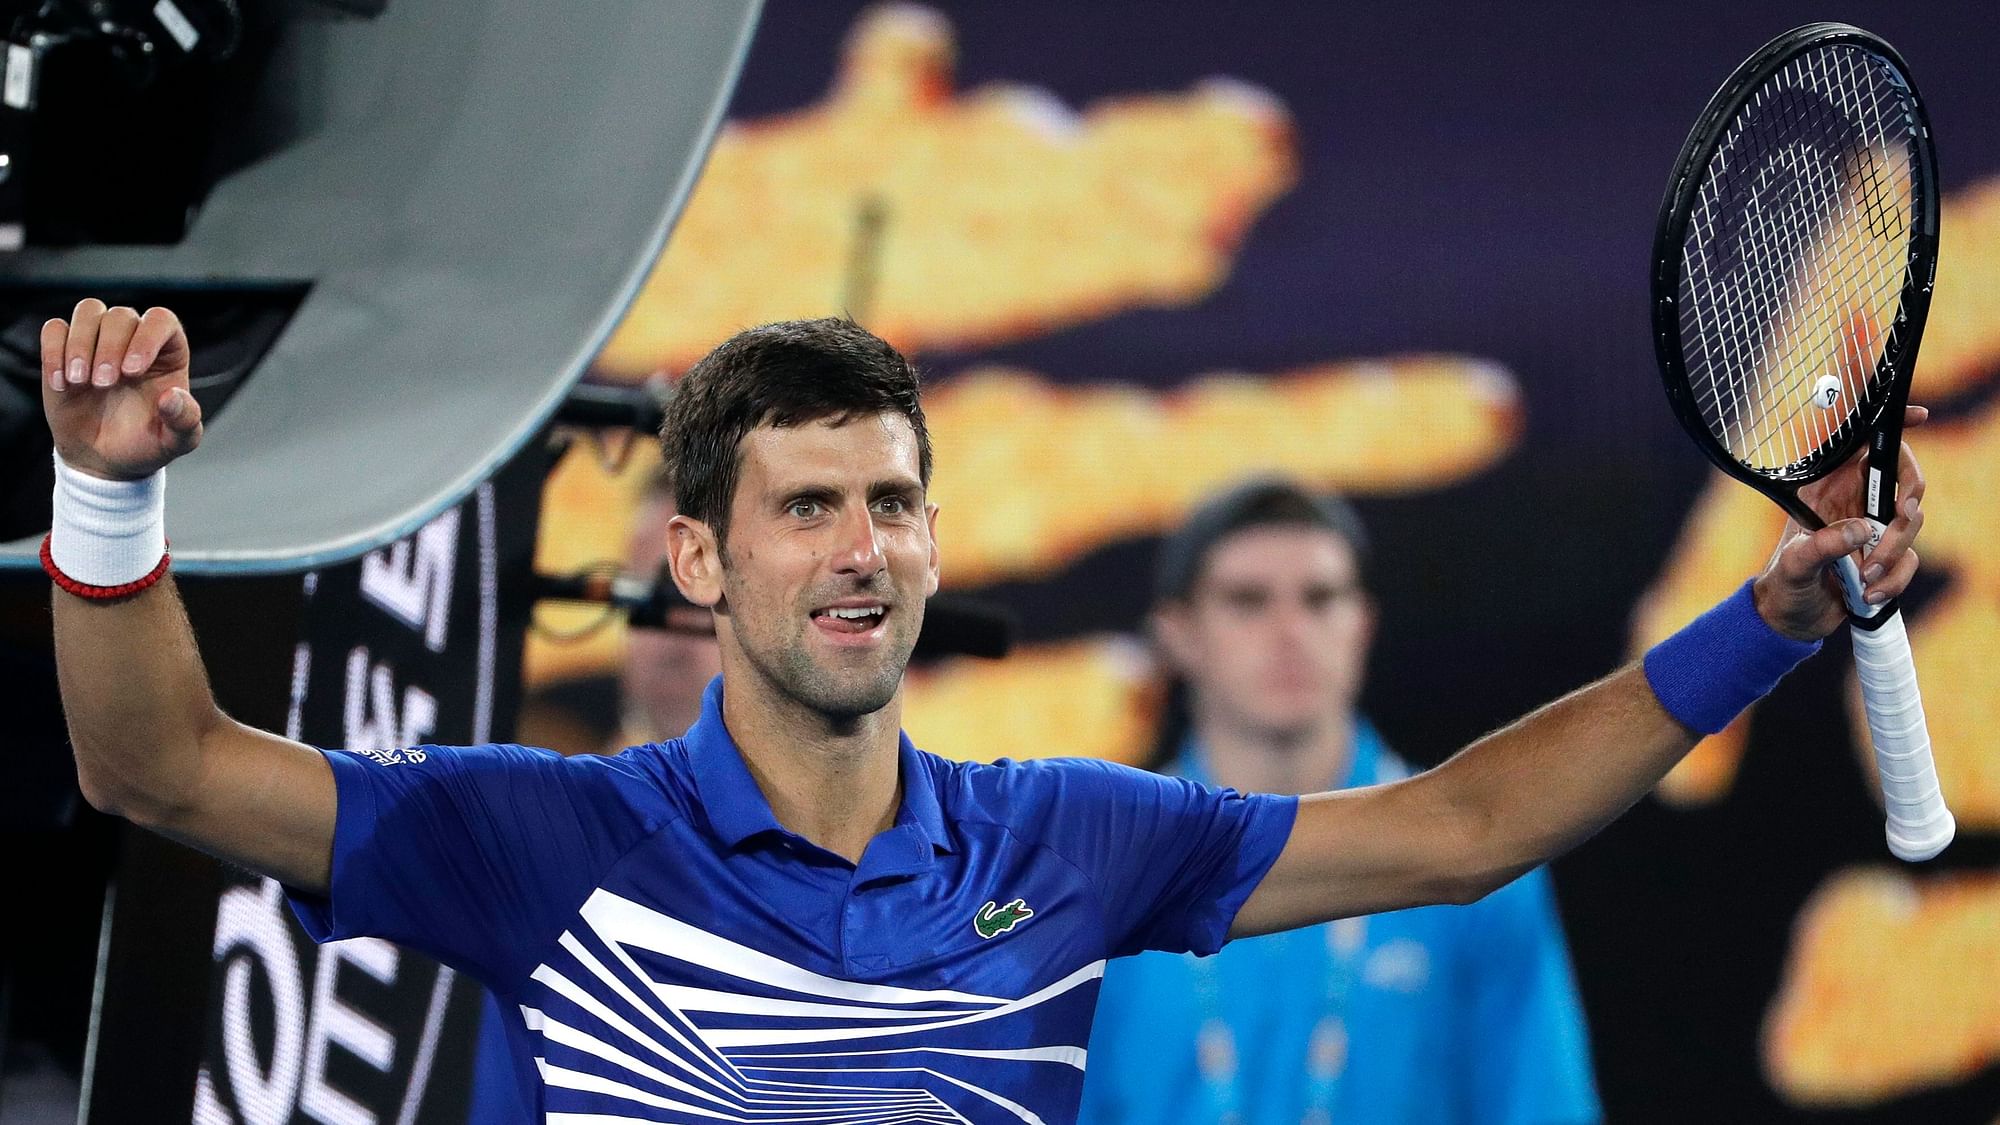 Novak Djokovic after his semi-final win against France’s Lucas Pouille at the Australian Open in Melbourne on Friday, January 25, 2019.